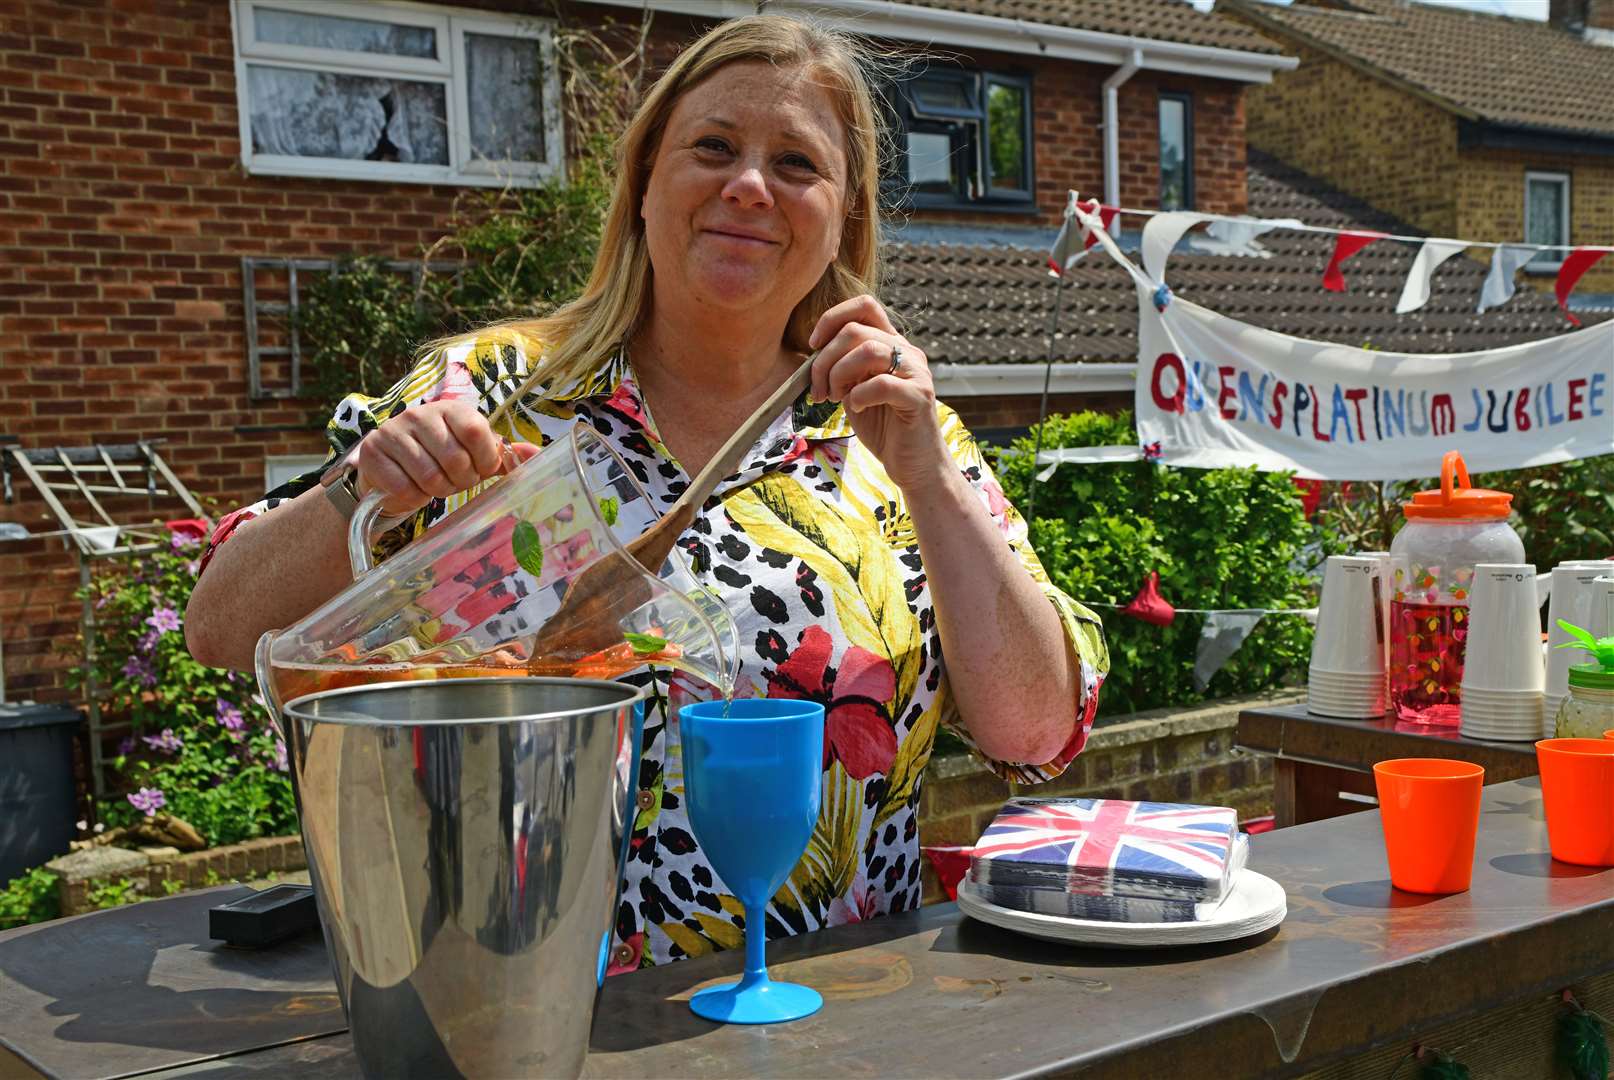 A street party encourages friends and neighbours to get together. Picture: Vikki Lince.